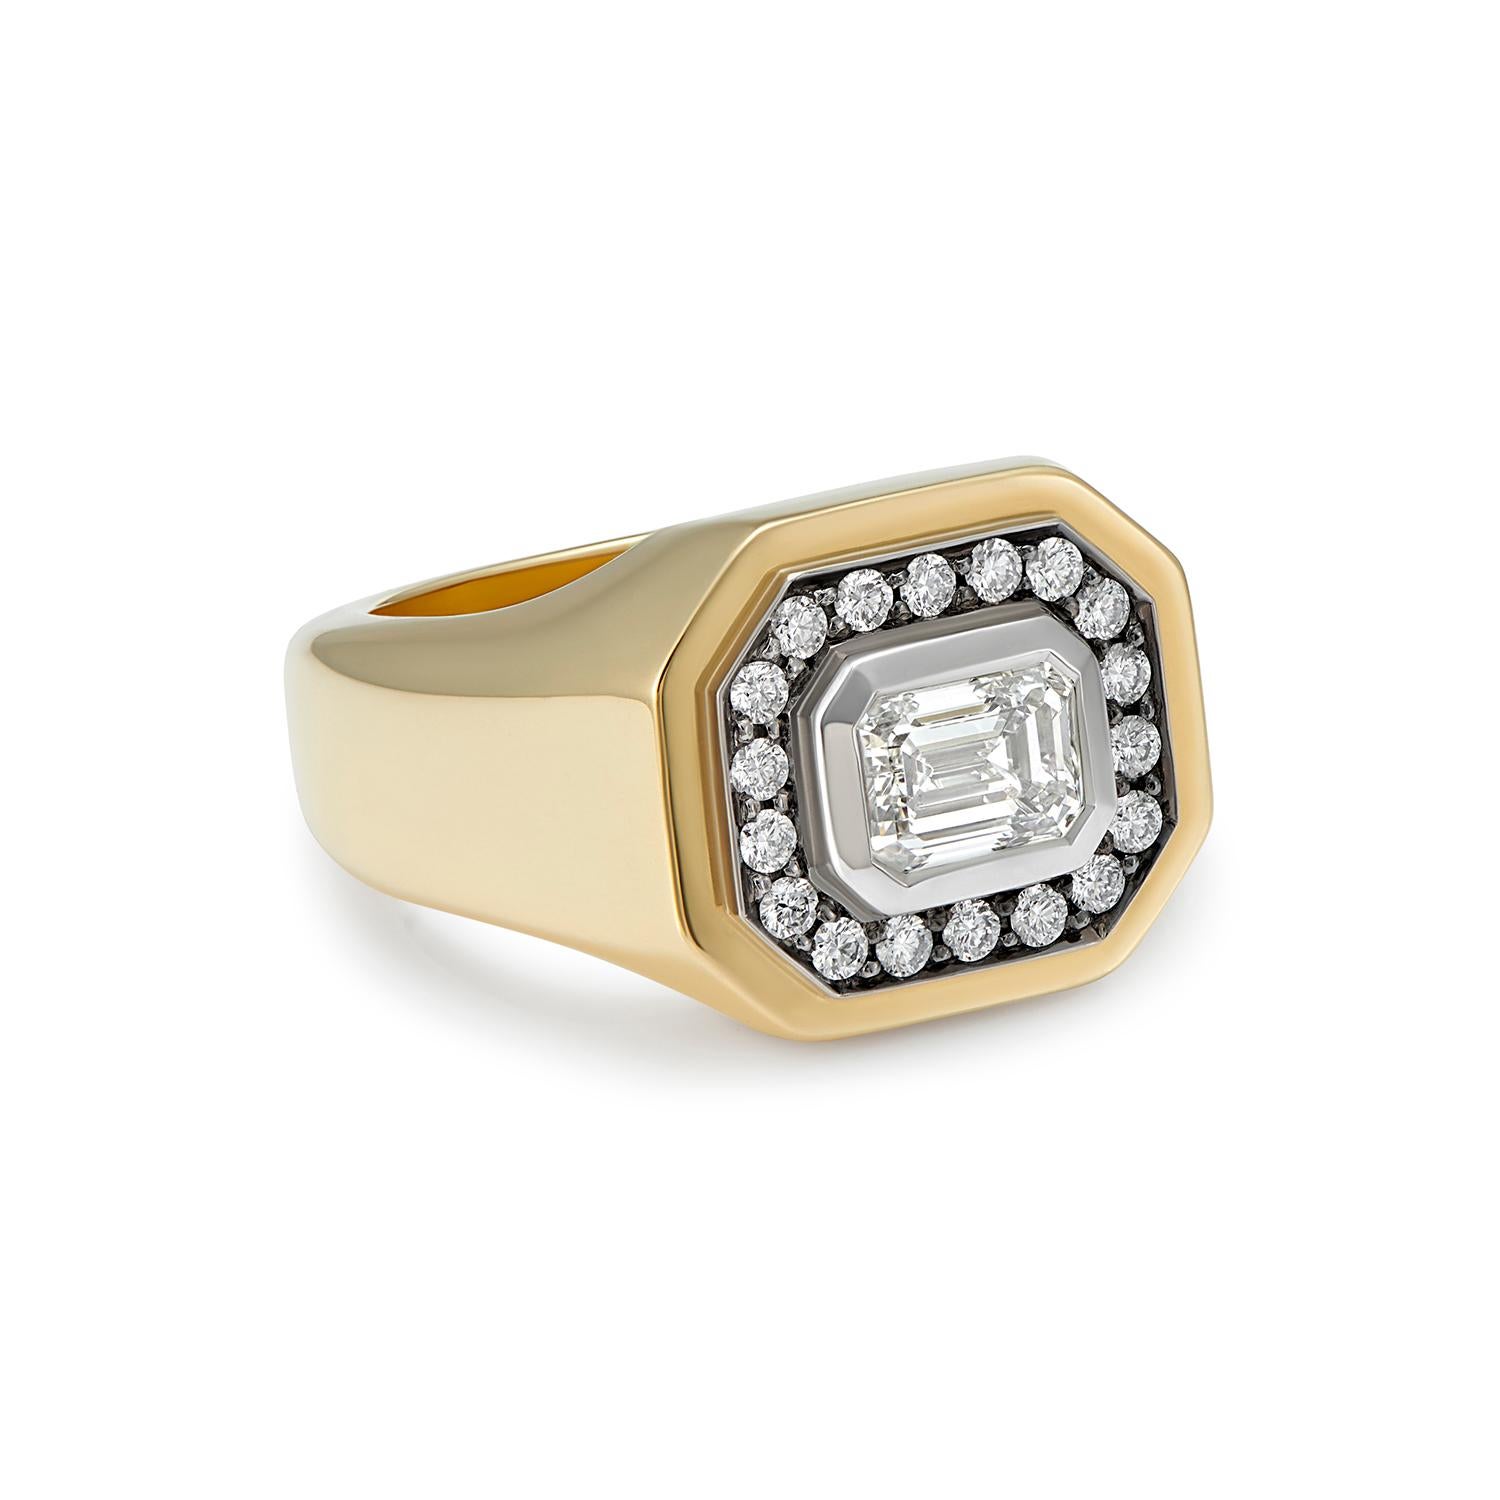 0.90ct Emerald cut Diamond (GIA)
0.51ct White Diamonds
18k Yellow Gold 

This fabulously chunky statement ring is set with an emerald cut diamond weighing 0.90 carat. We have used black rhodium around the halo of diamonds weighing 0.51 carats.
Total